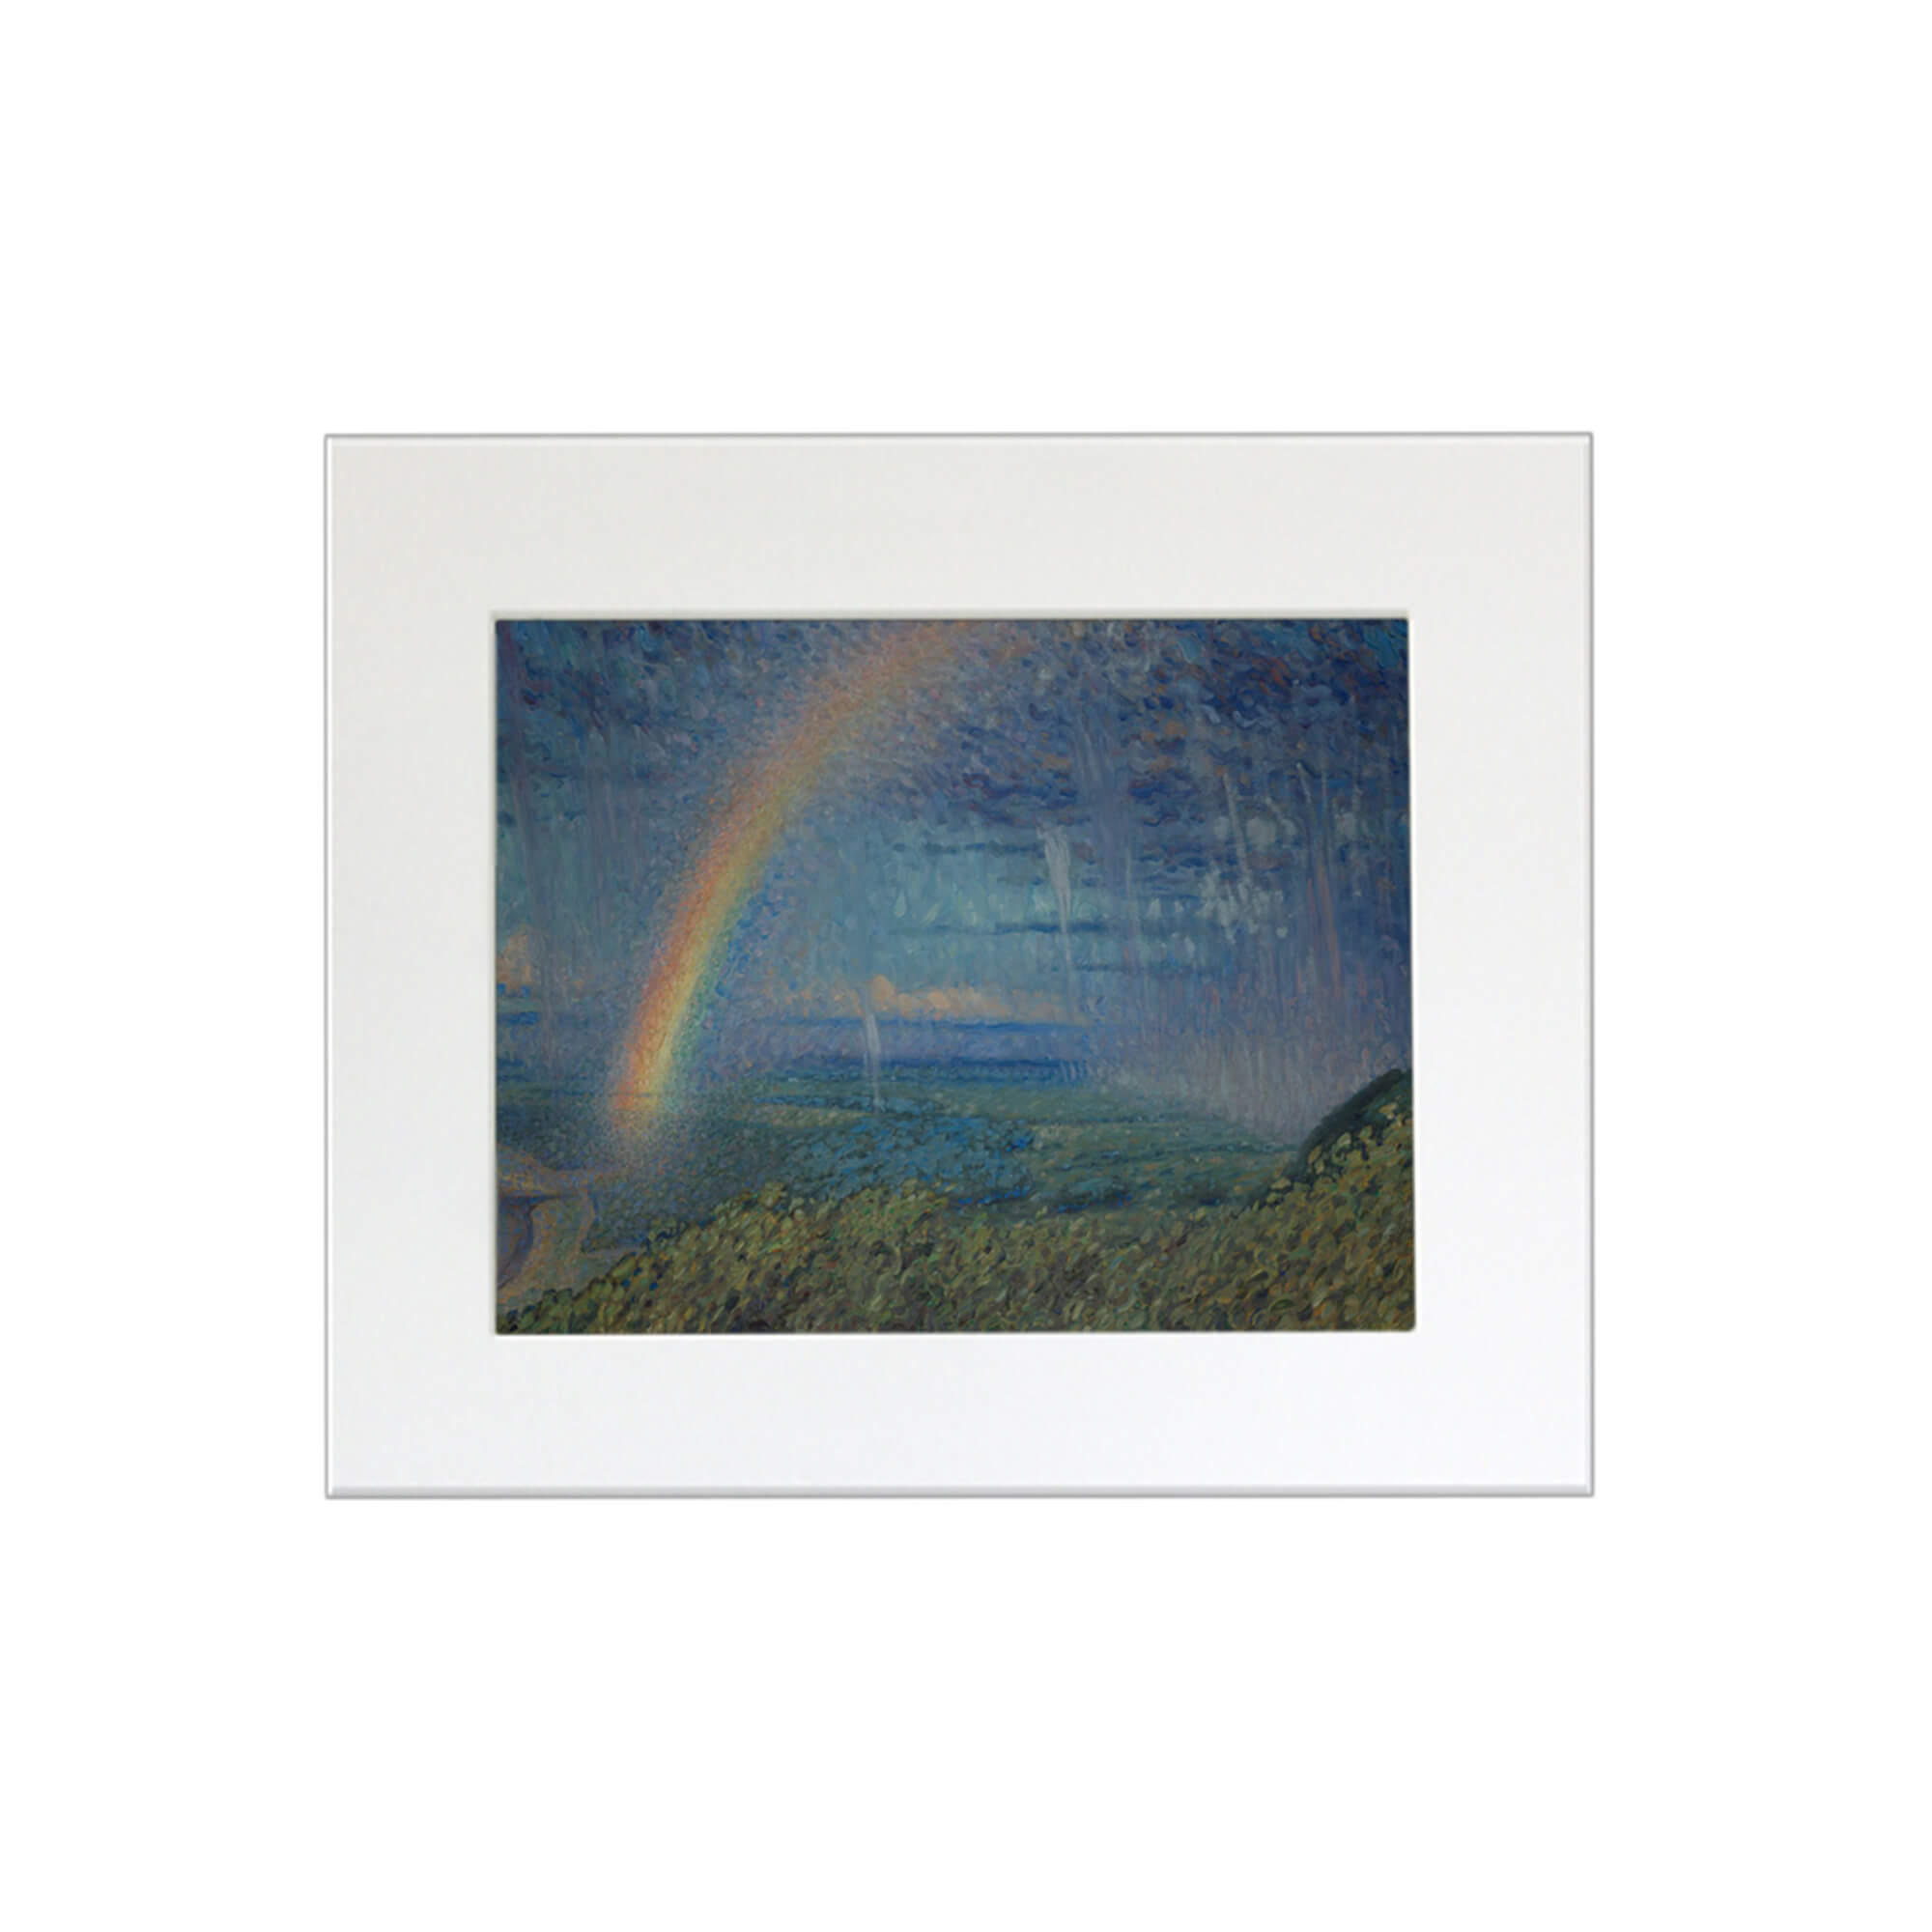 A landscape framed by a rainbow and some tropical trees